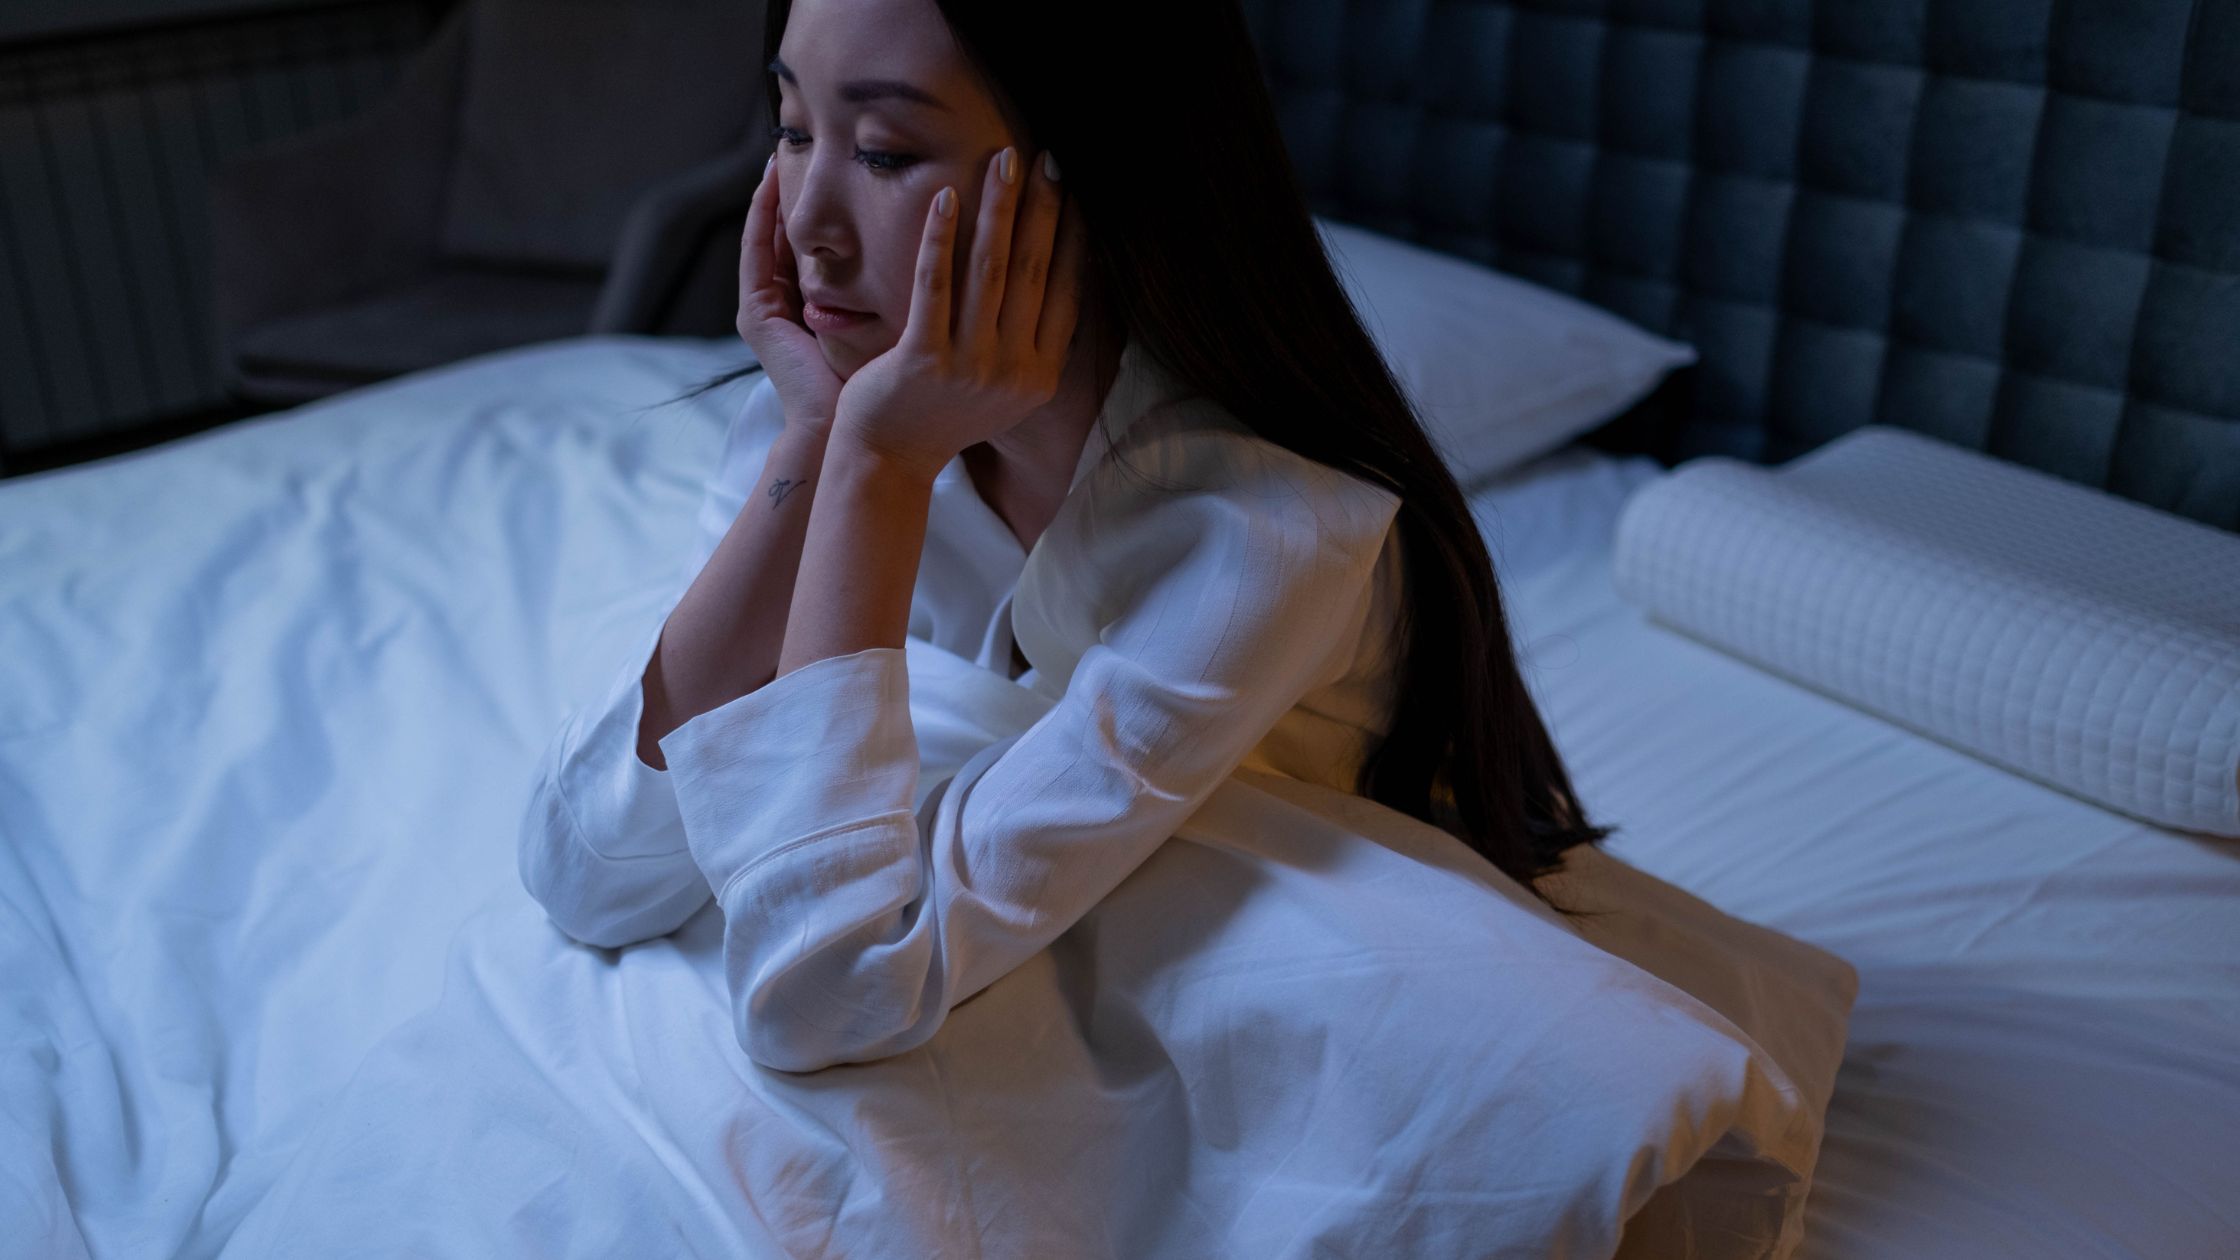 a lady sitting up in bed alone - financial implication